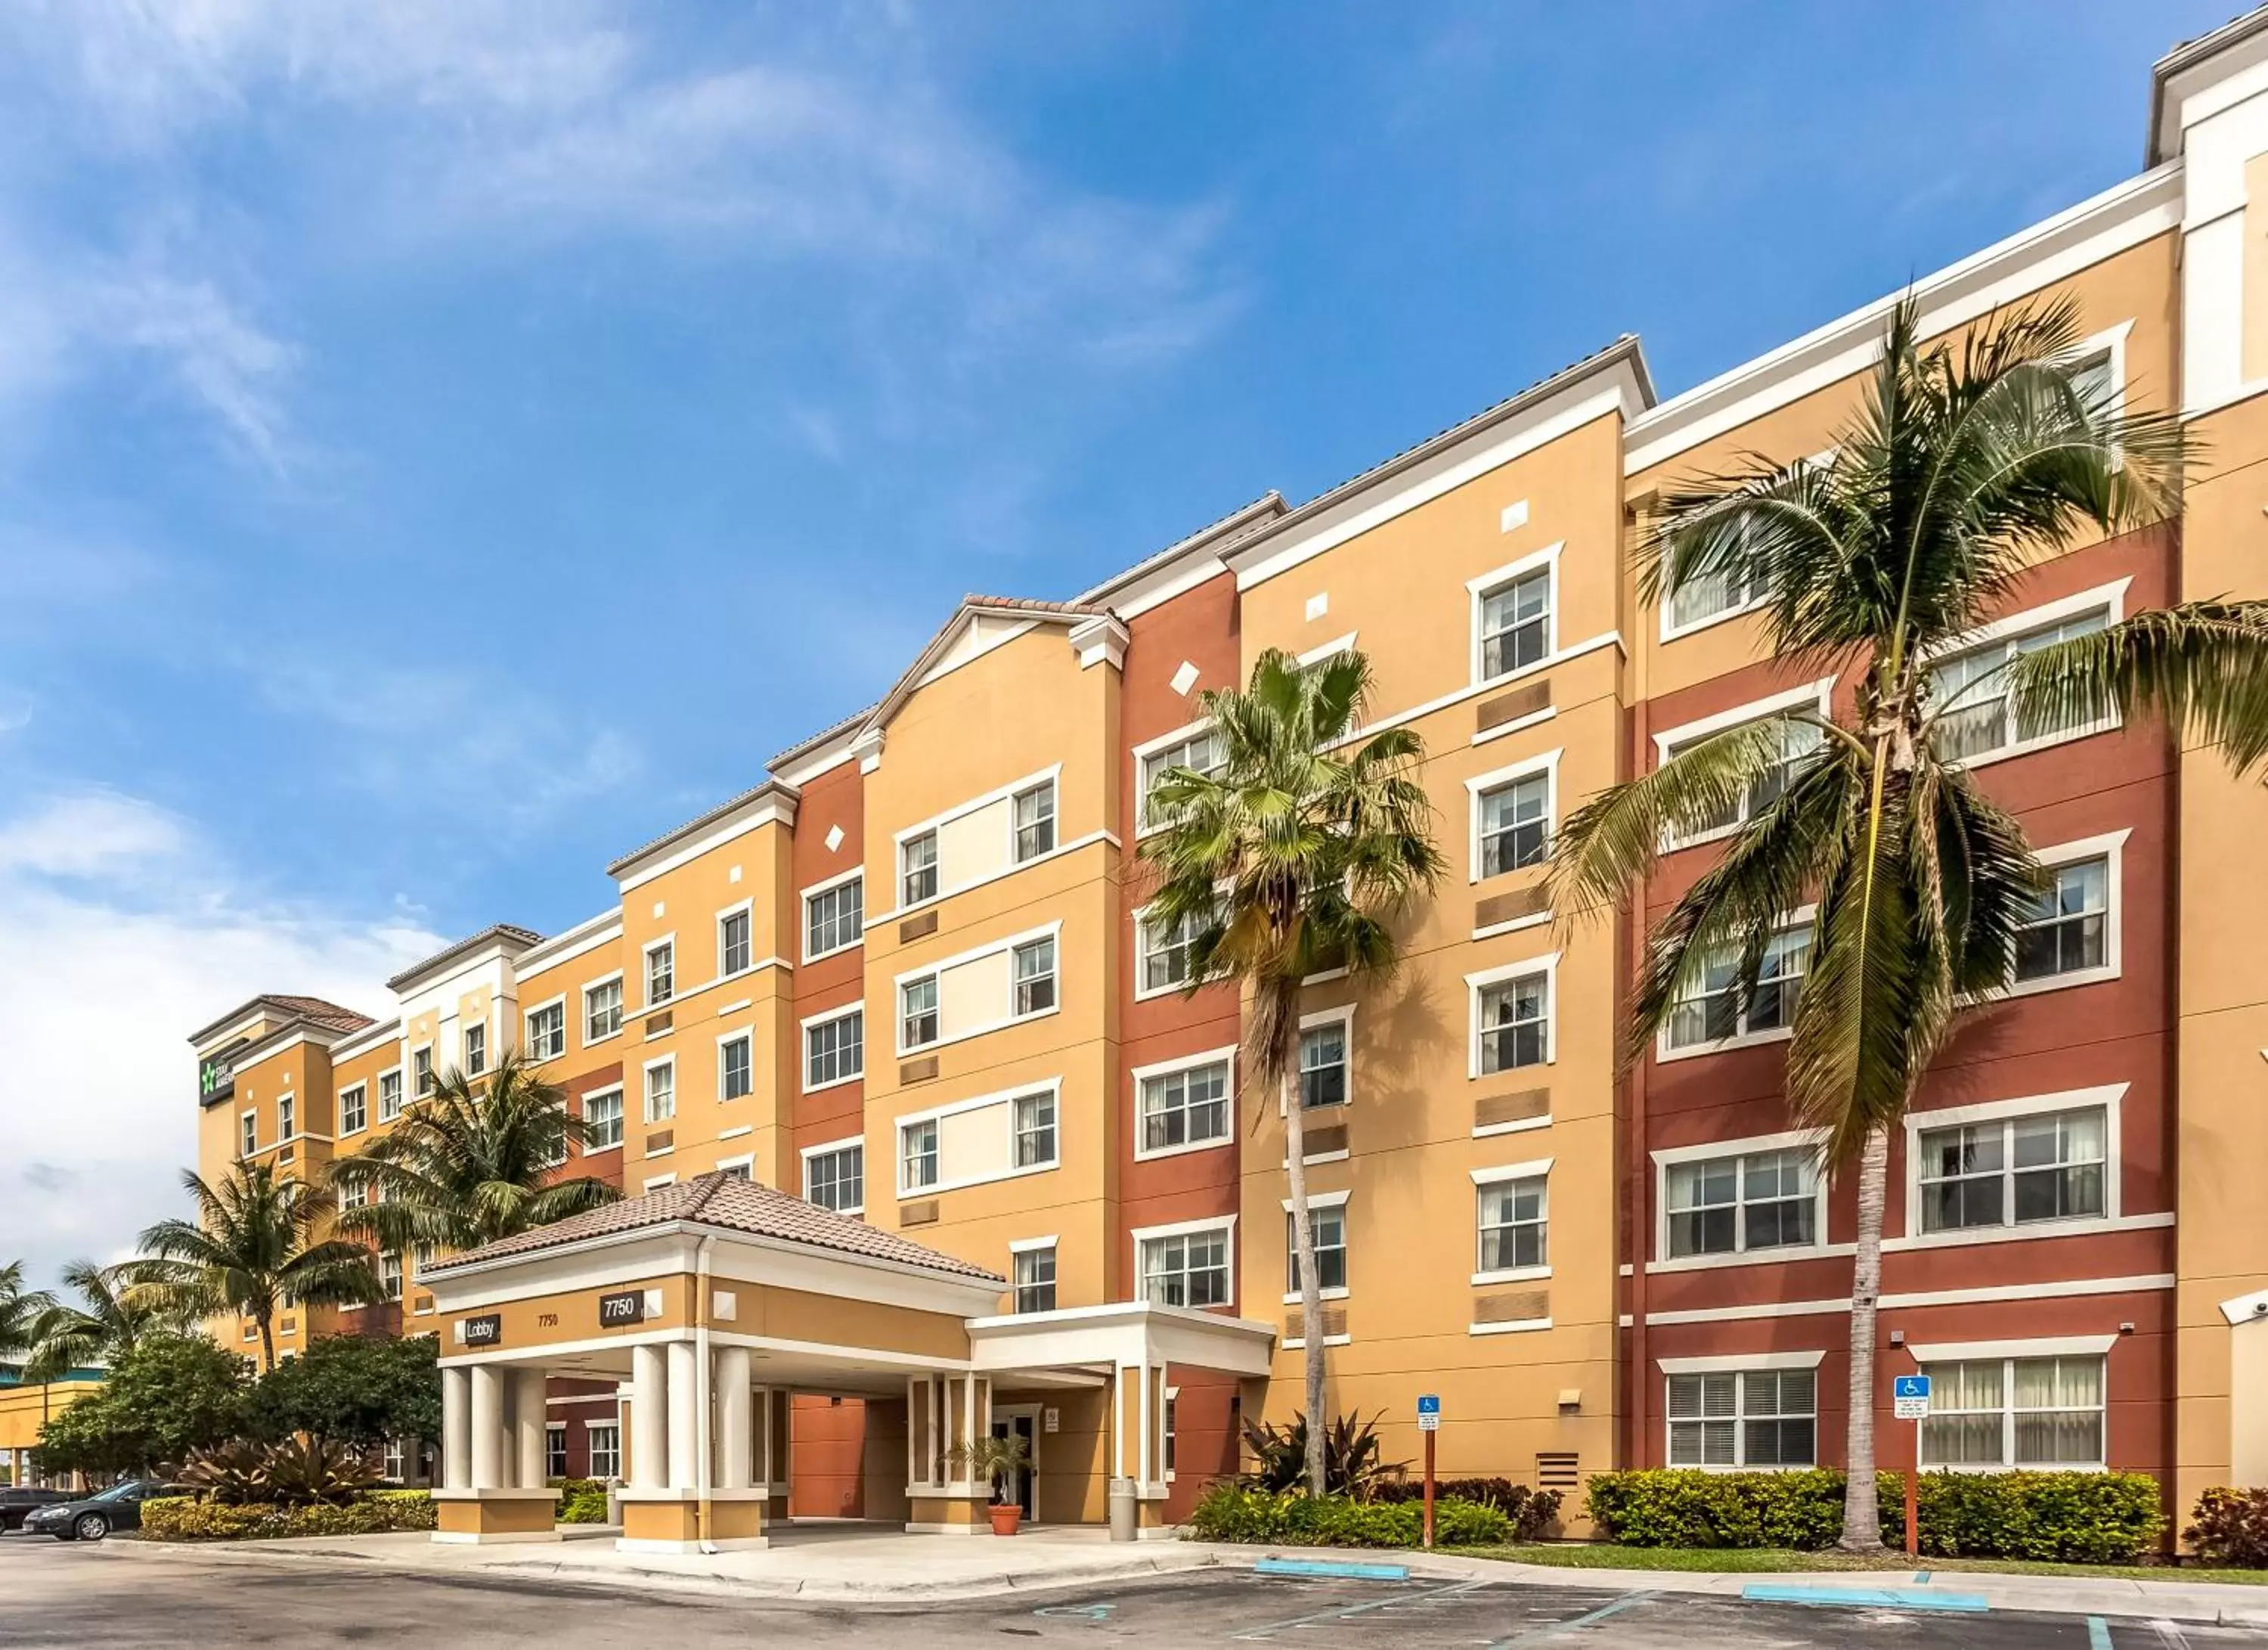 Property building in Extended Stay America Premier Suites - Miami - Airport - Doral - 25th Street